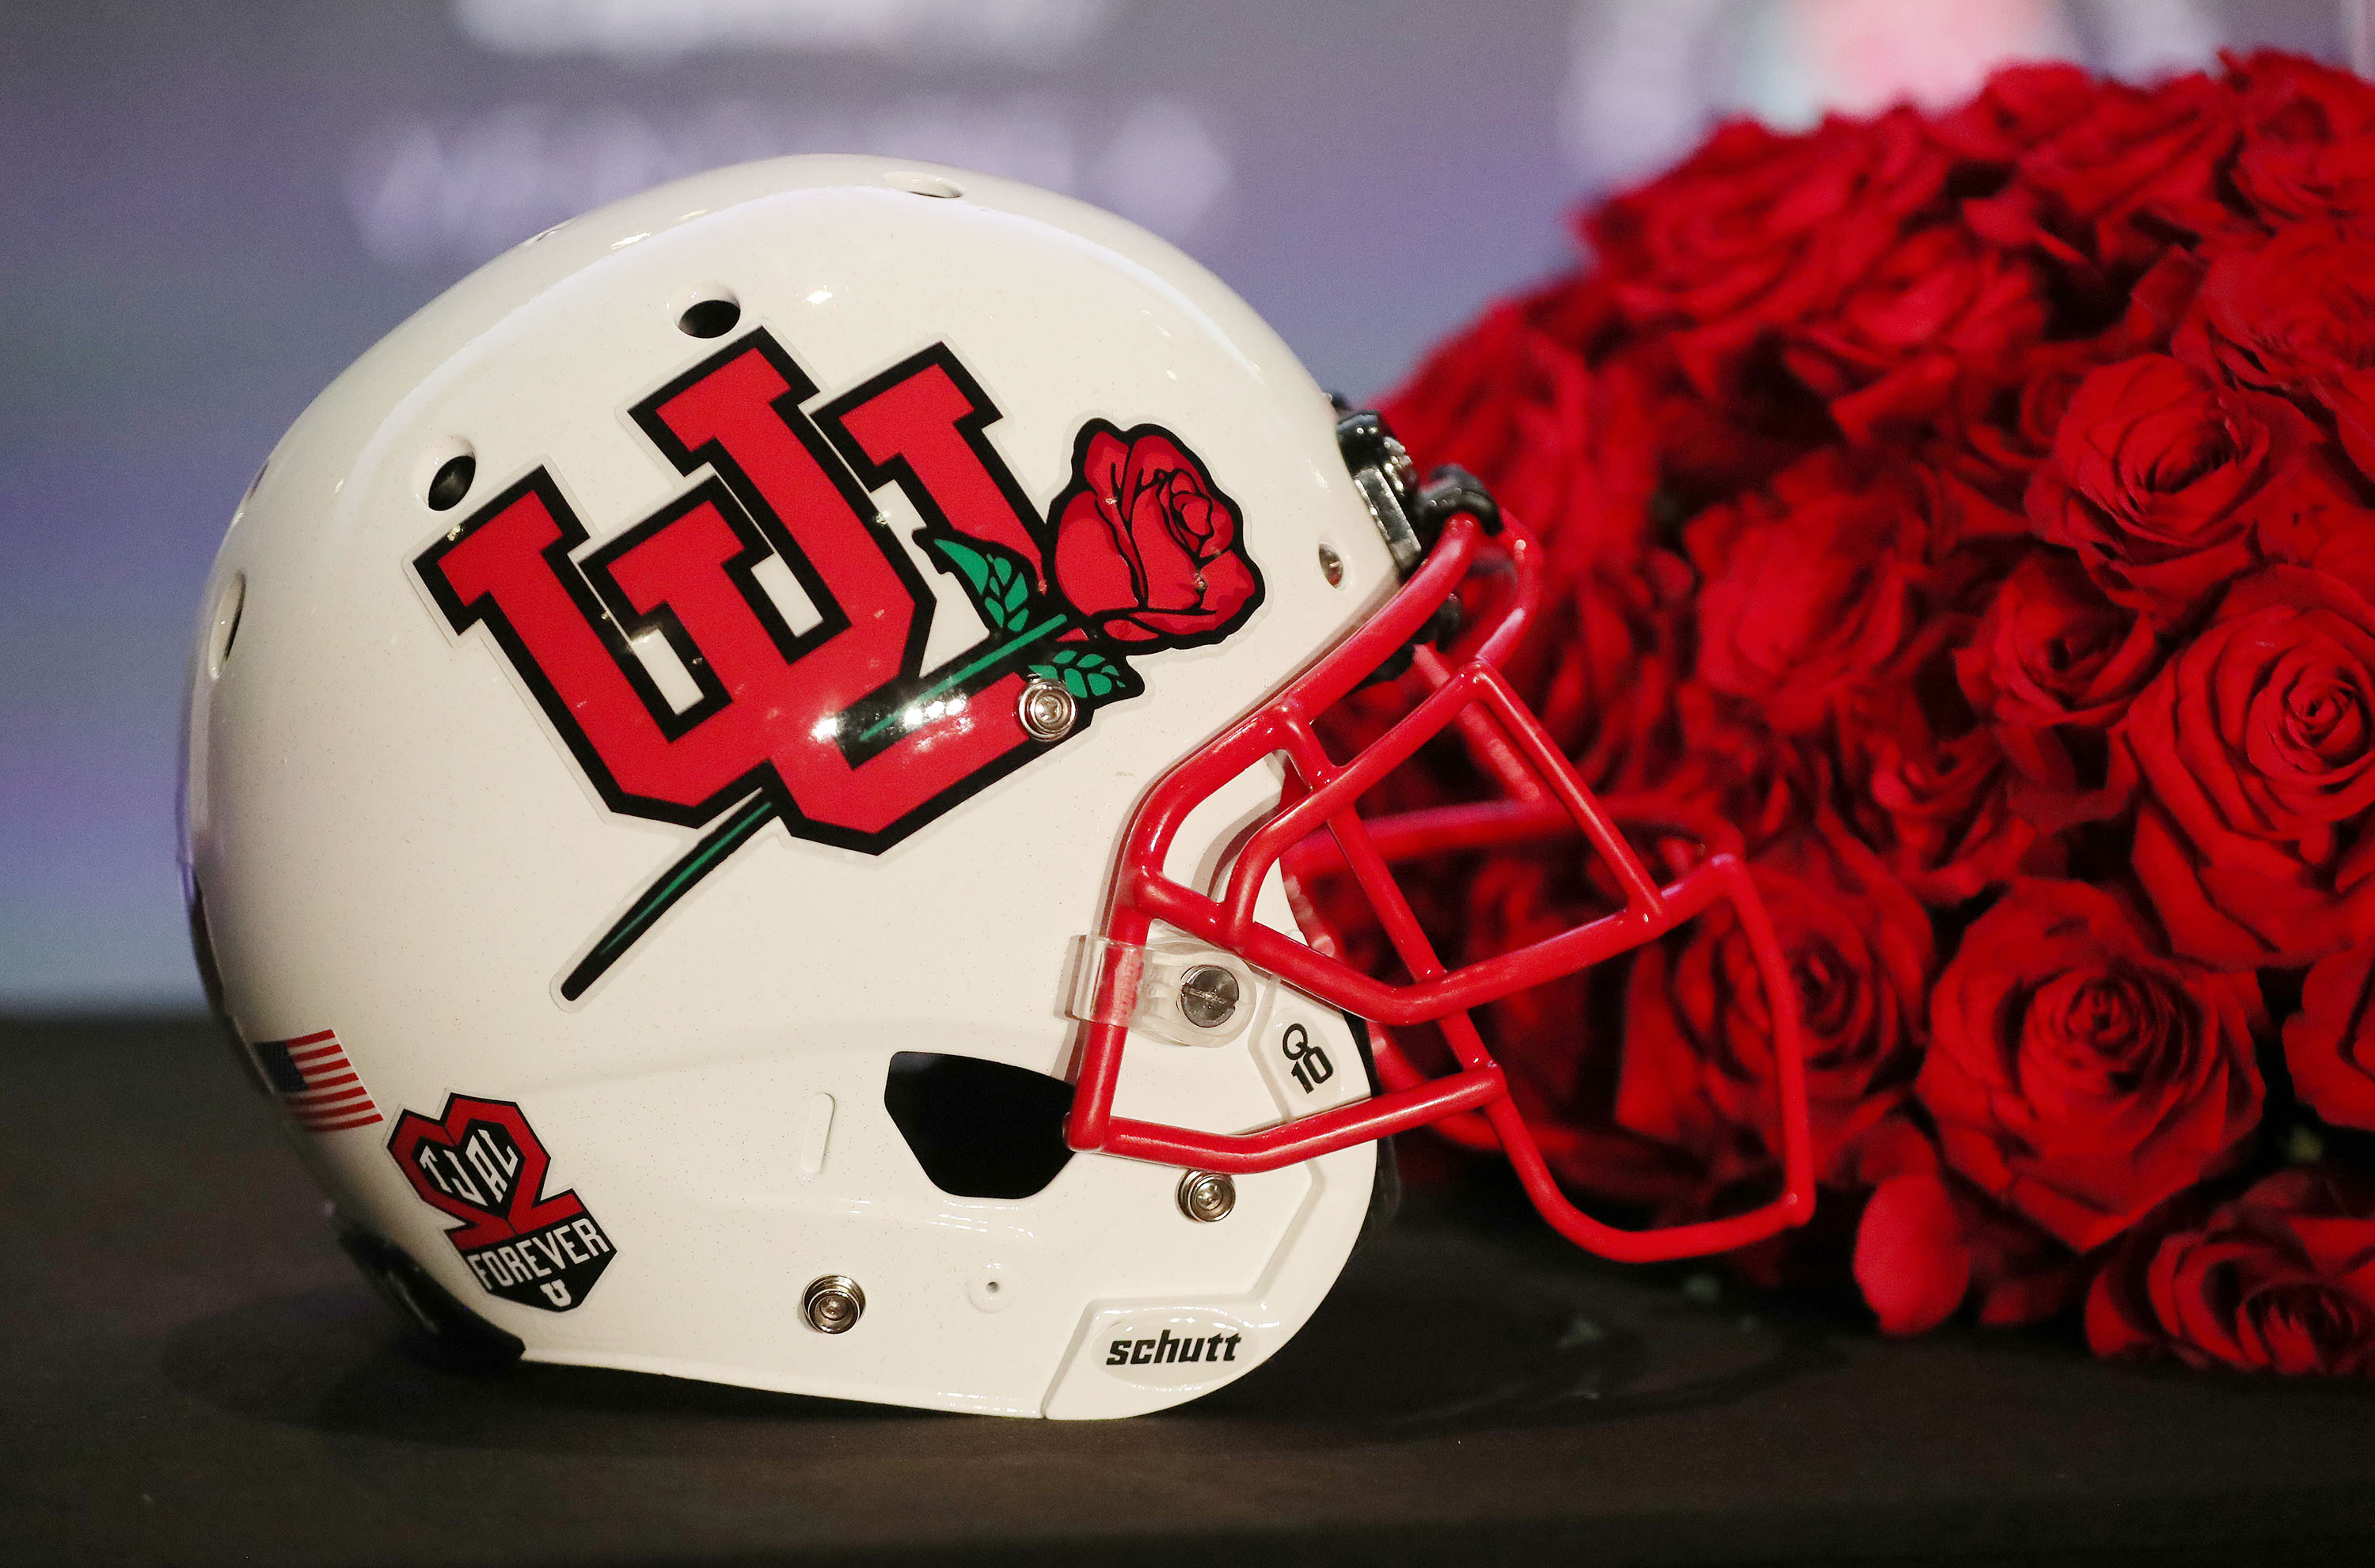 A Utah Utes helmet is displayed during a Rose Bowl press conference in Los Angeles on Friday, Dec. 31, 2021.